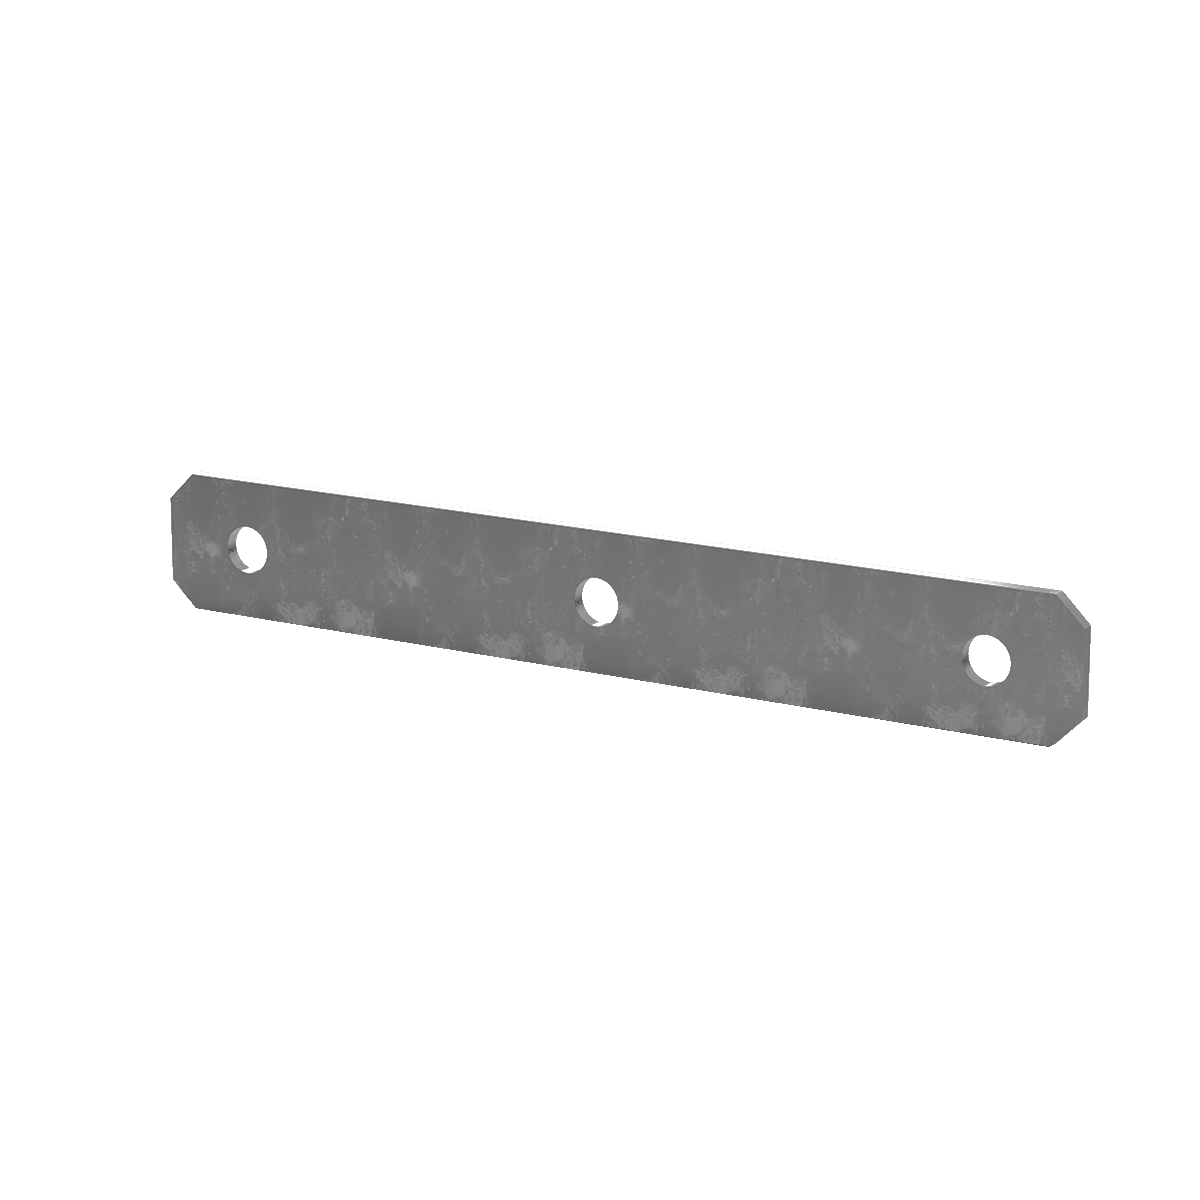 Backing plate with 3 holes for surface mount handles